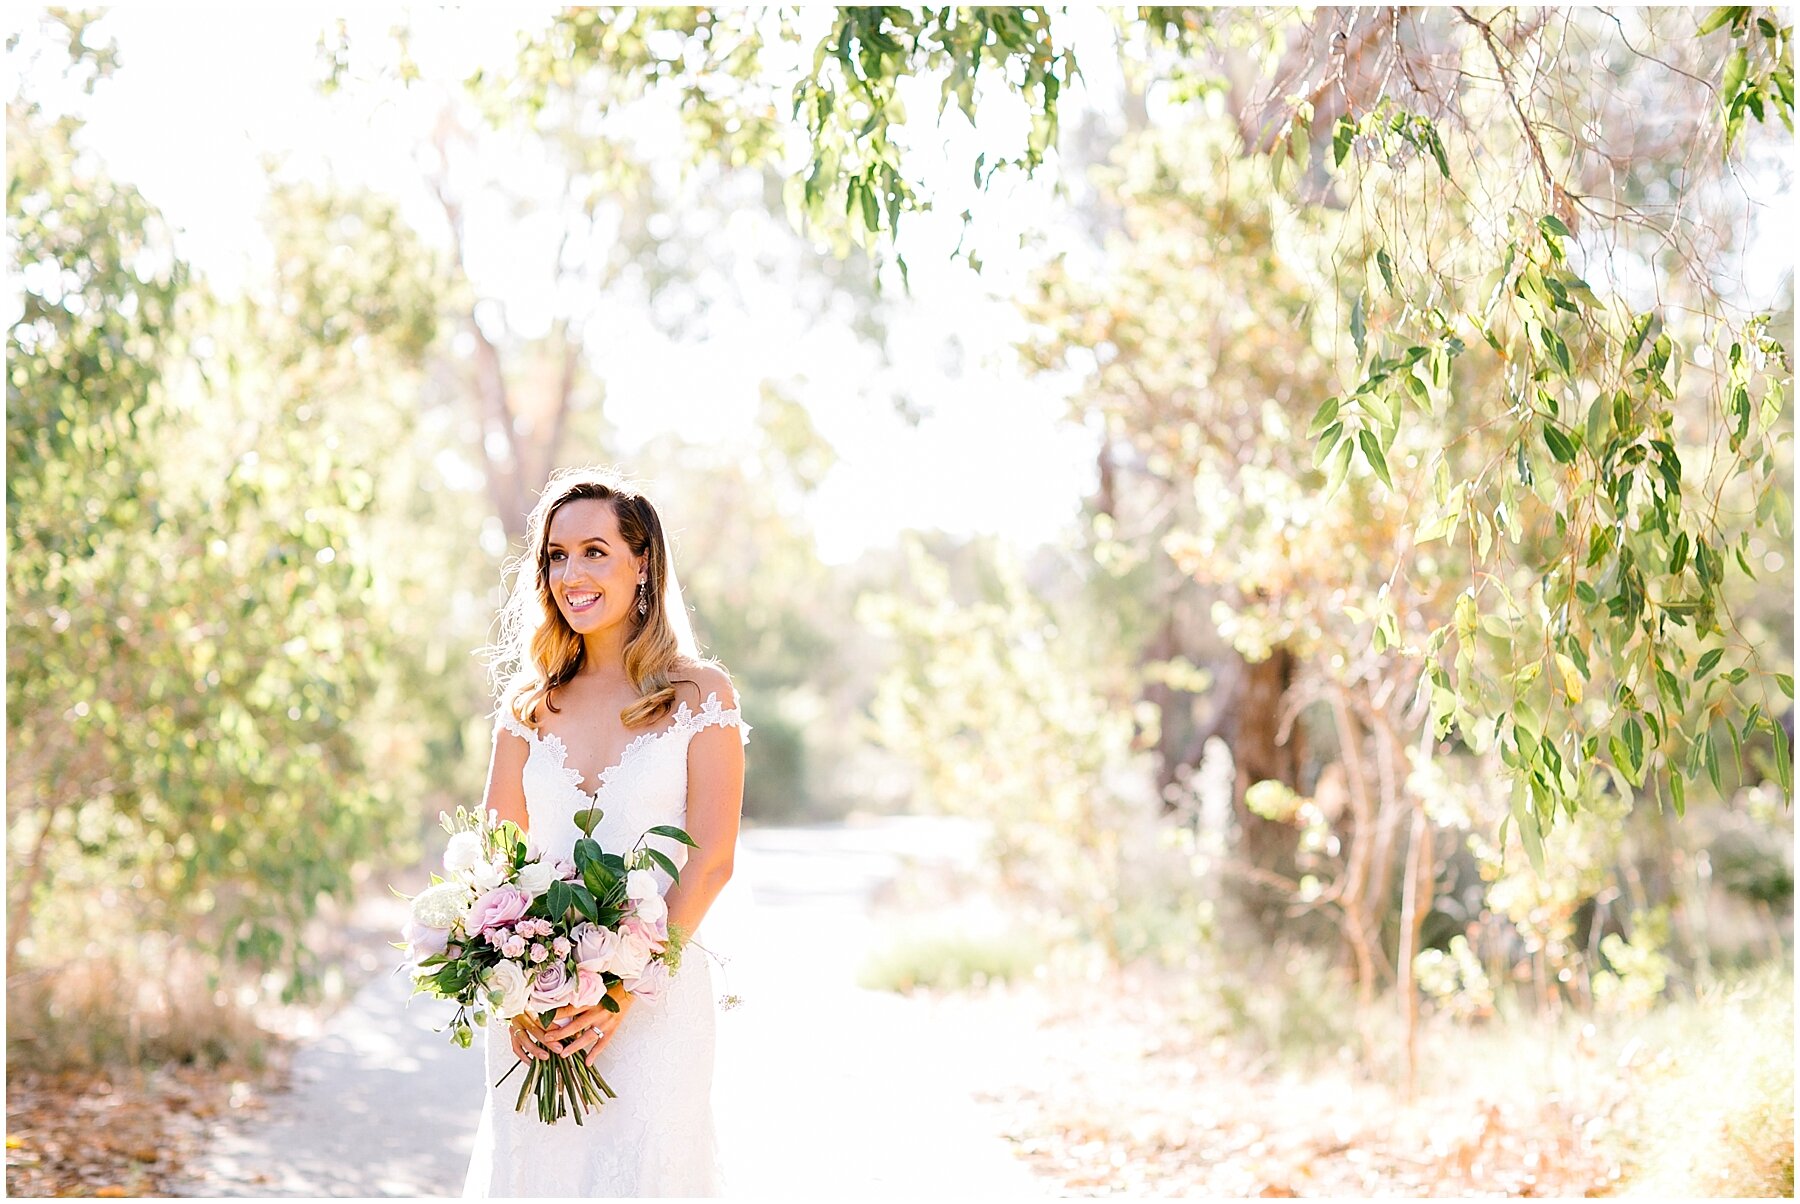 Bride in Kings Park | Perth Wedding Photography